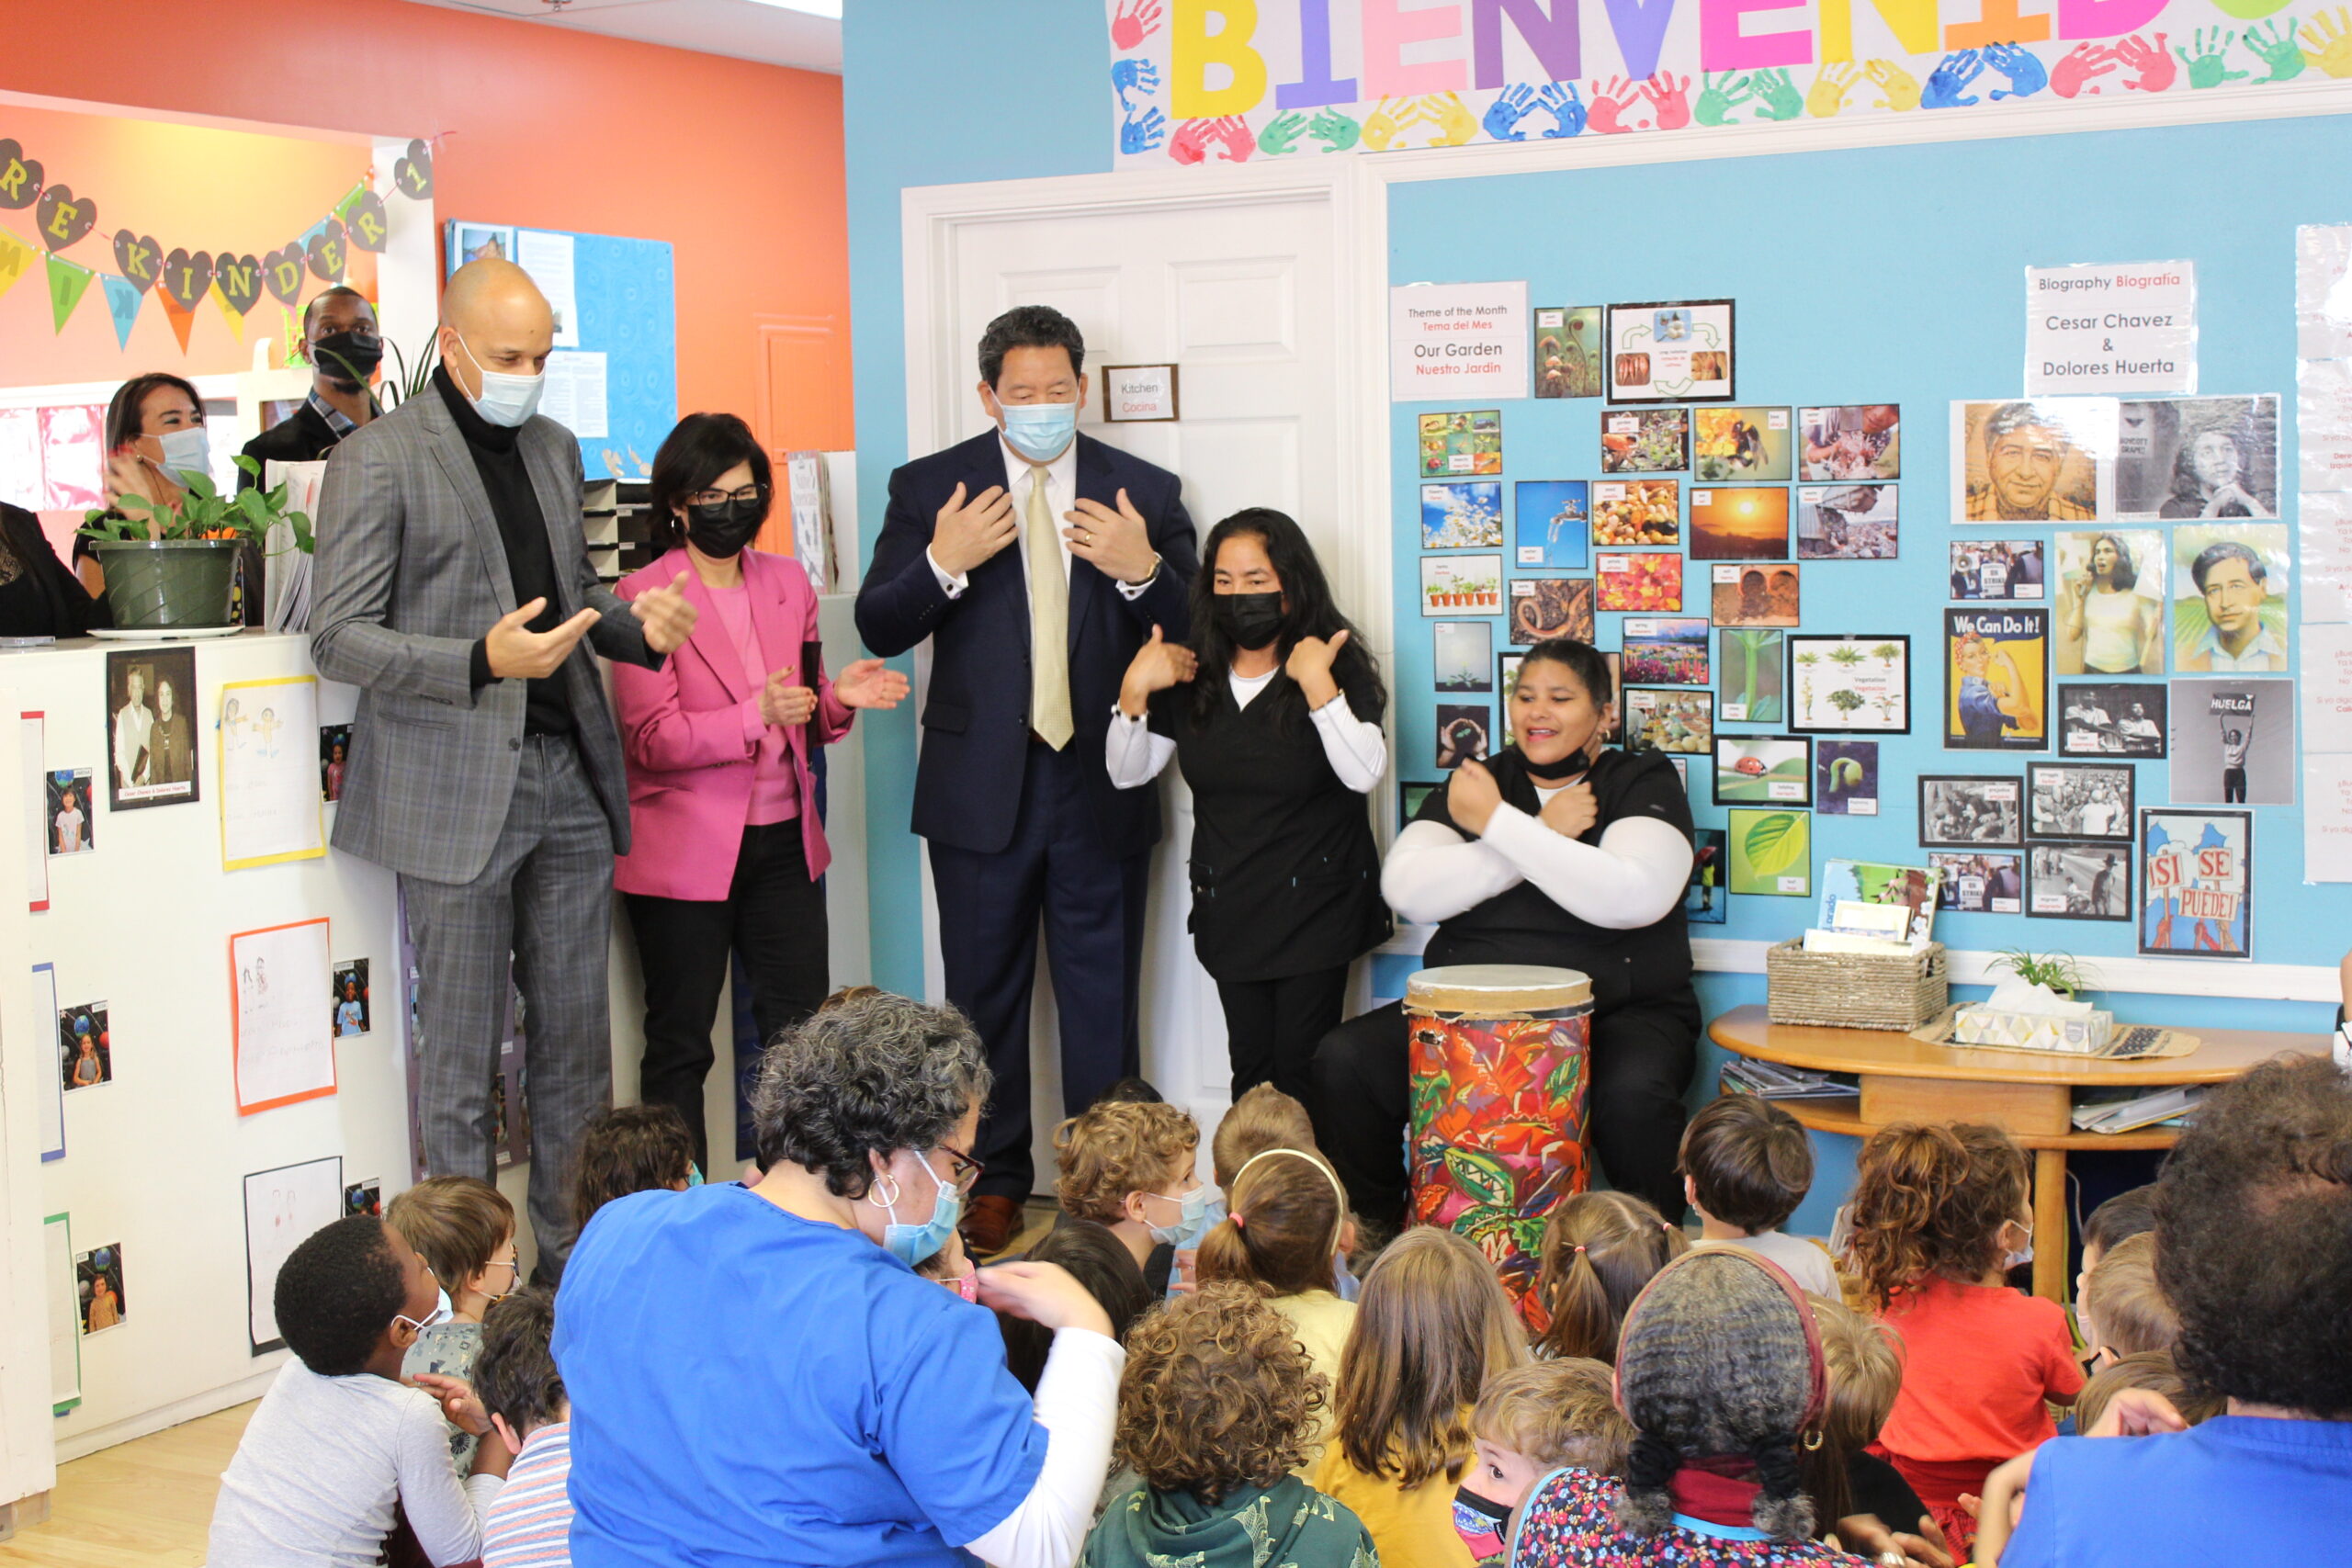 Mayor Harrell and Councilmember Morales participate in a call and response song with students at La Escuelita.